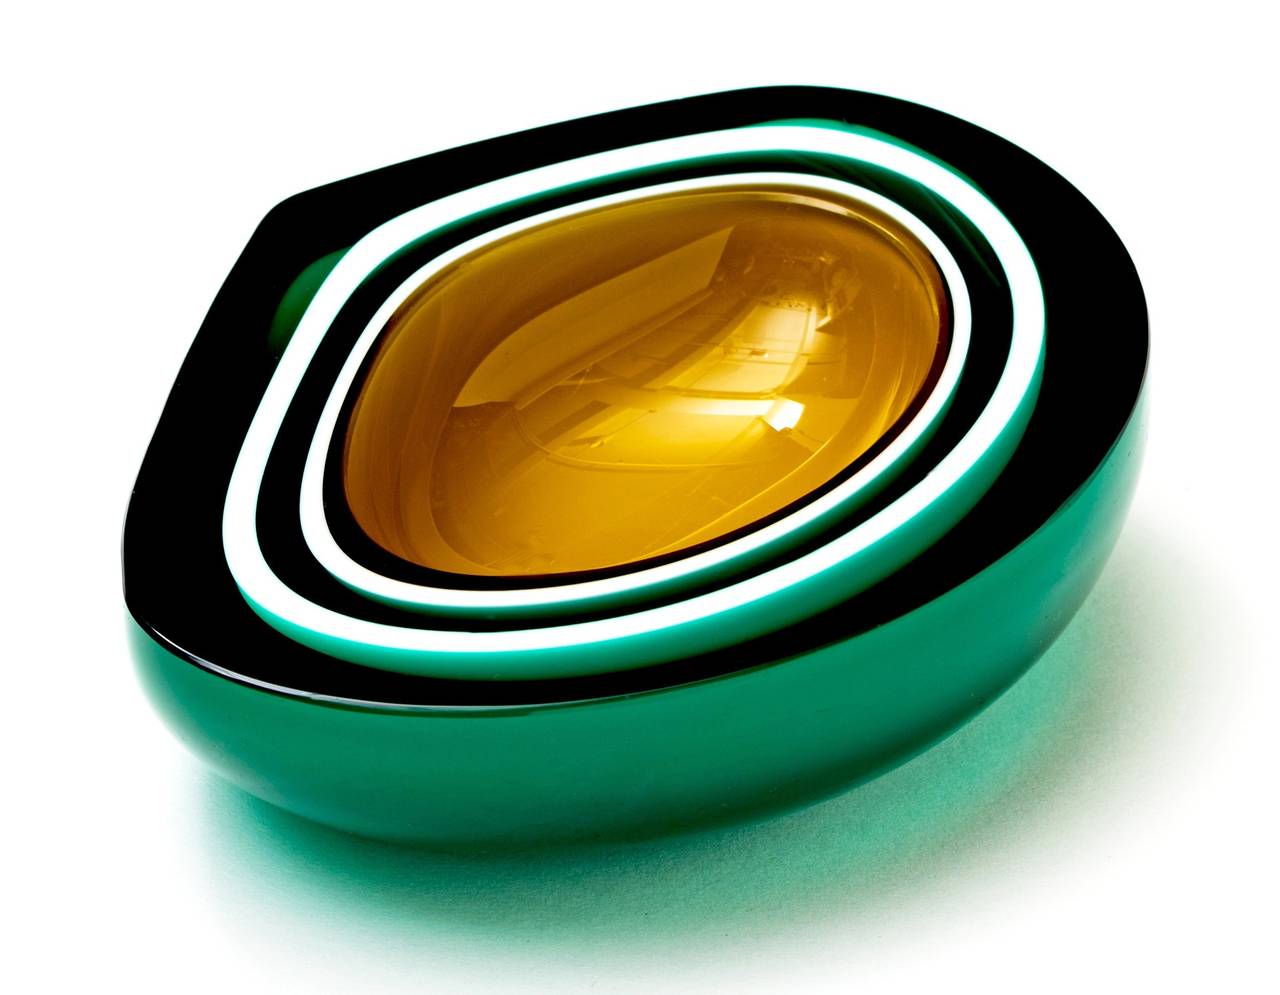 Stunning Asymmetrical Murano Geode Bowl with striking pattern of alternating dark green and white layers with luscious gold glass center.

Please note camera lights and equipment reflect onto the glass.